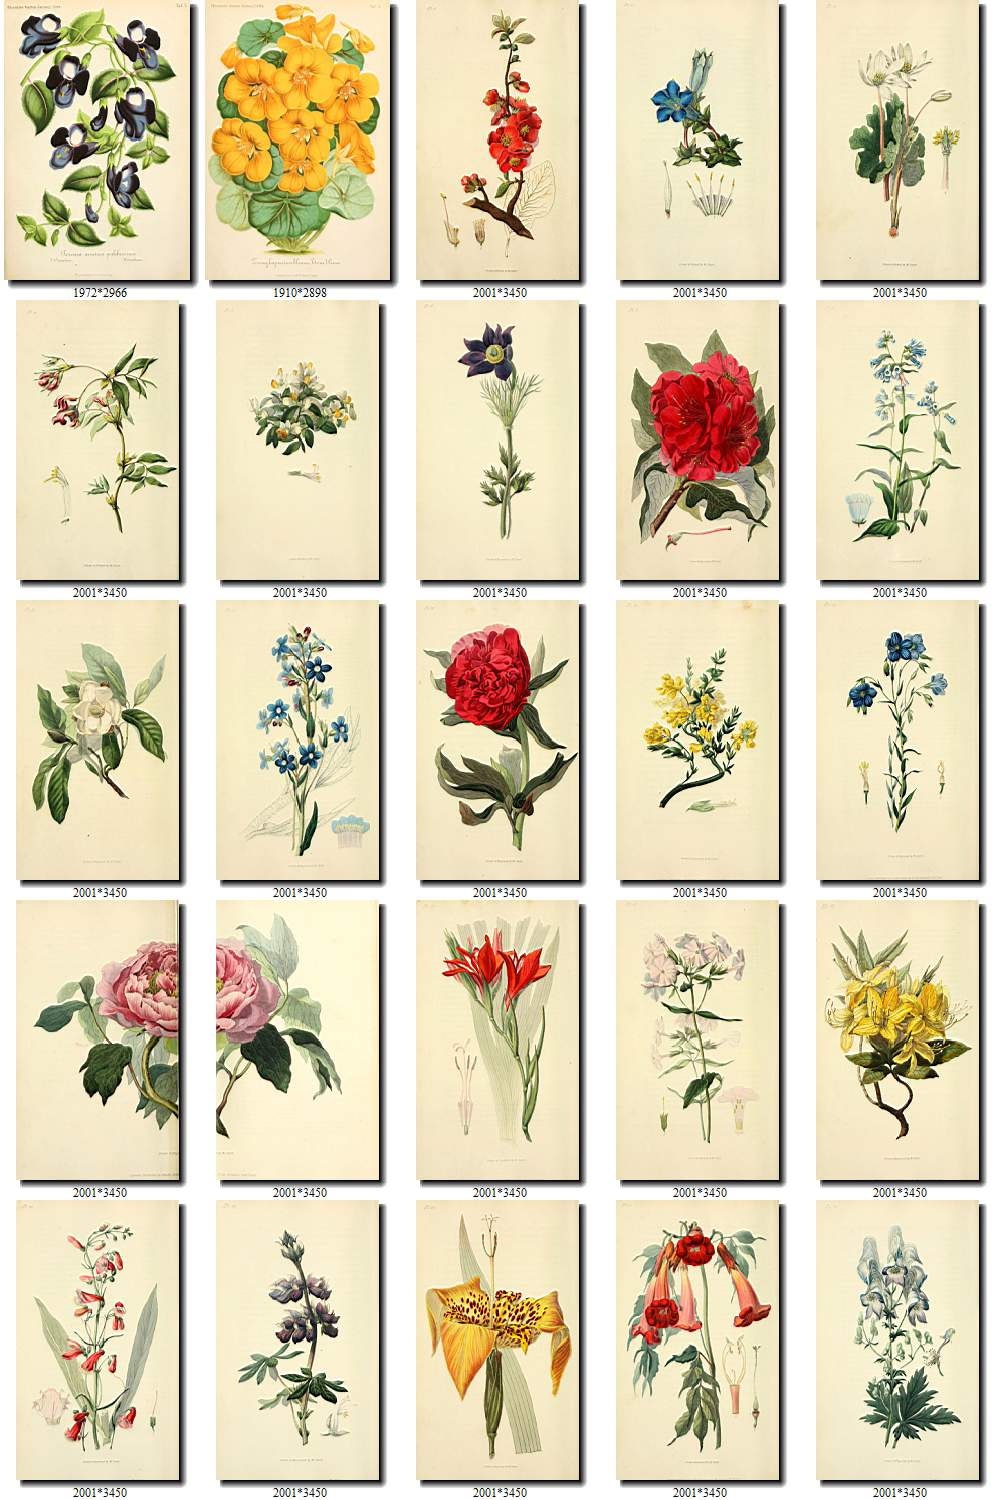 FLOWERS-19 Collection of 245 vintage images vegetable | Etsy